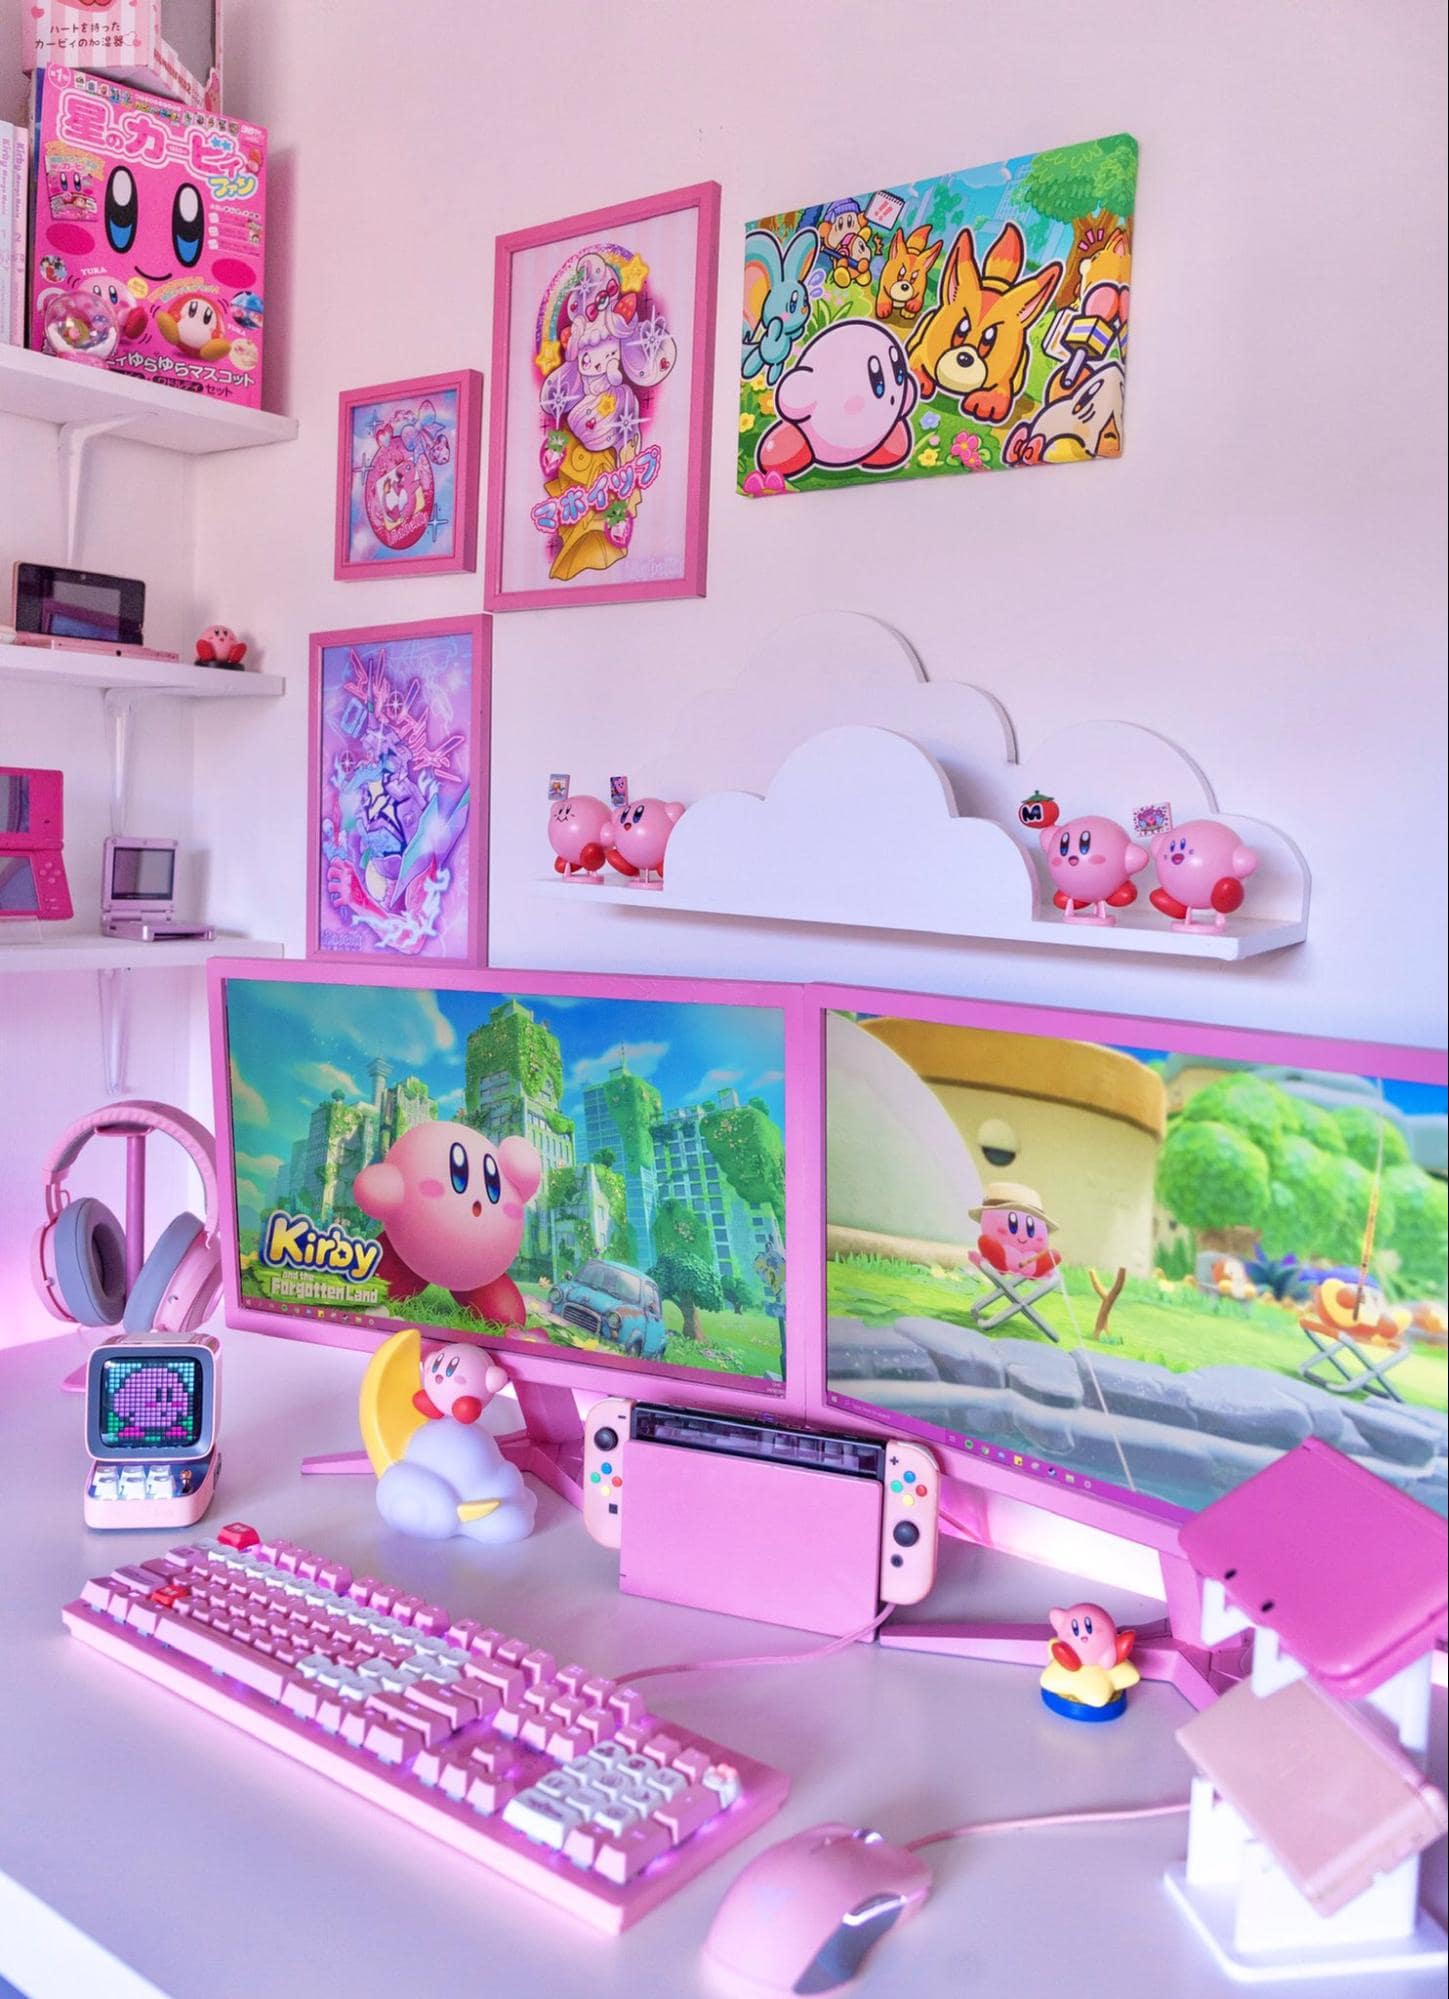 A Kirby-themed pink gaming setup